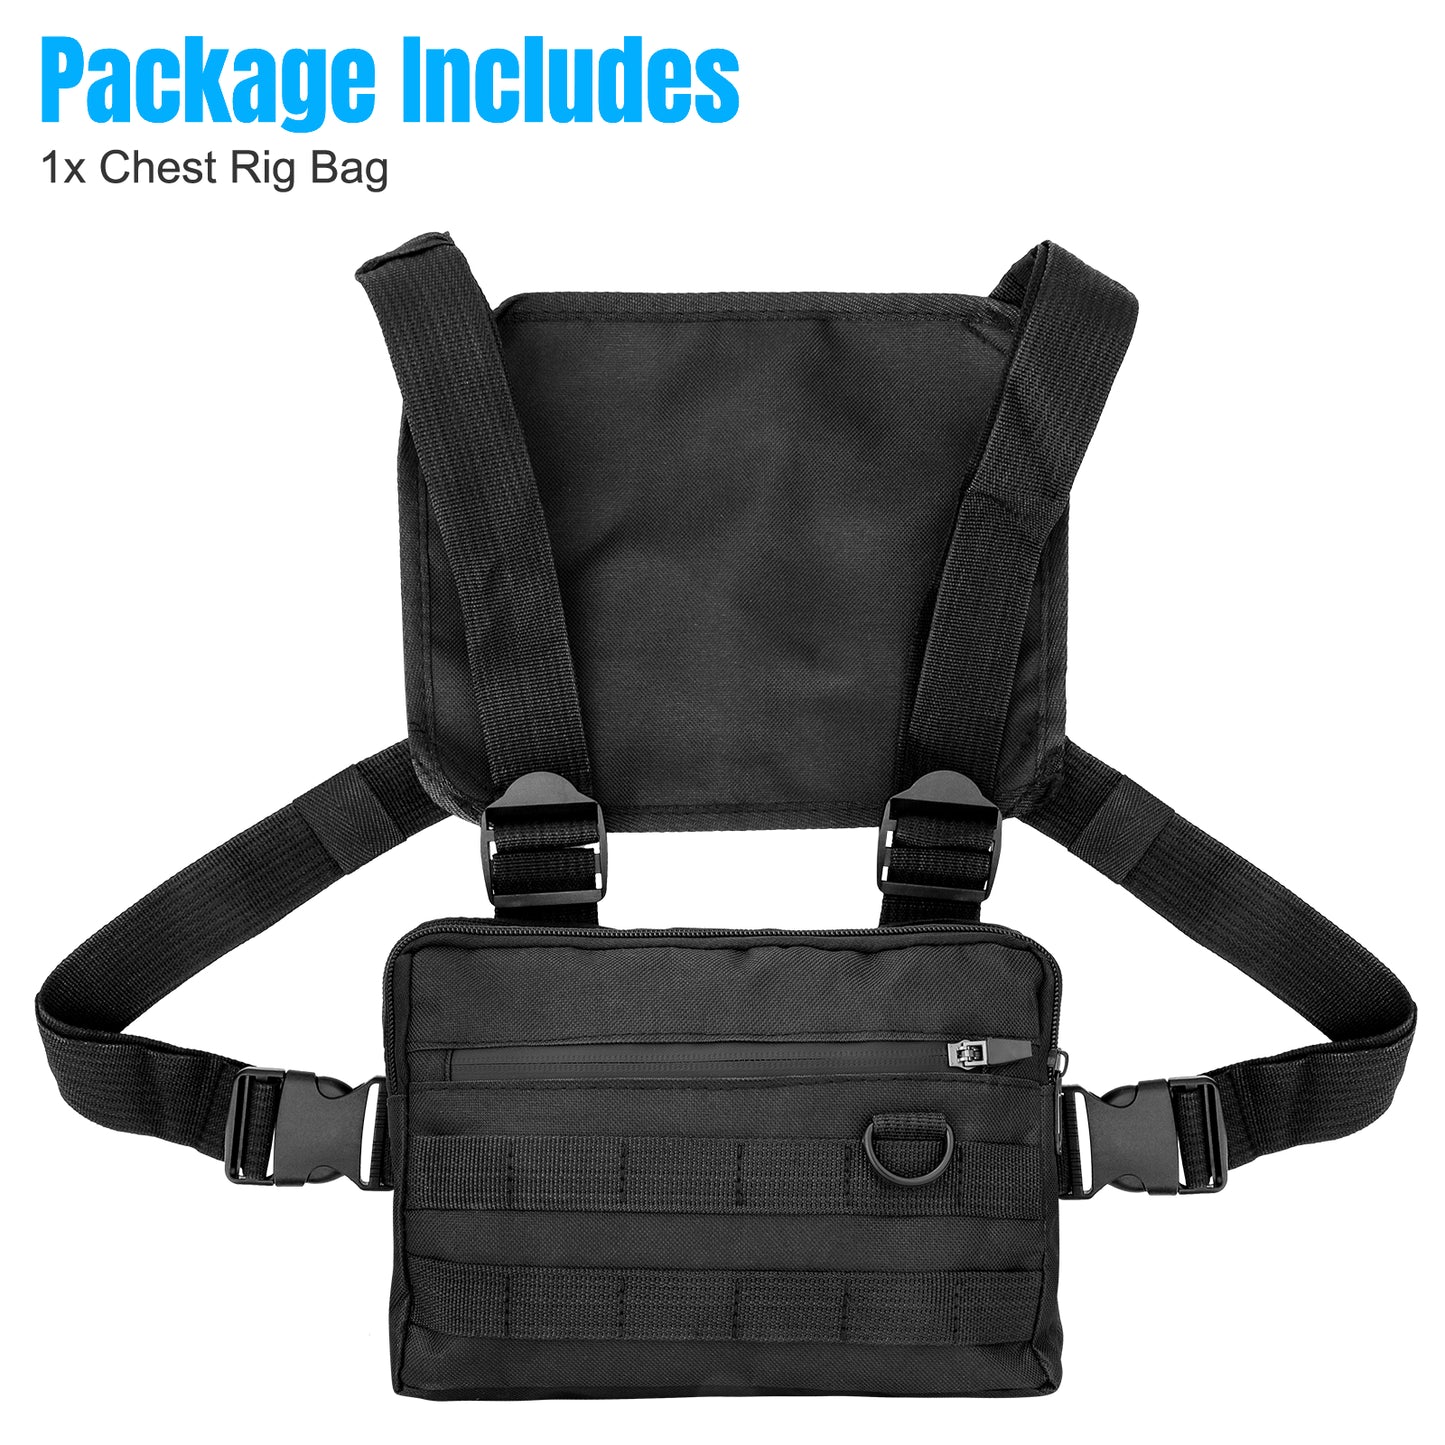 Tactical Pack - Oxford Fabric Chest Rig Bag for Outdoor Sports and Activities